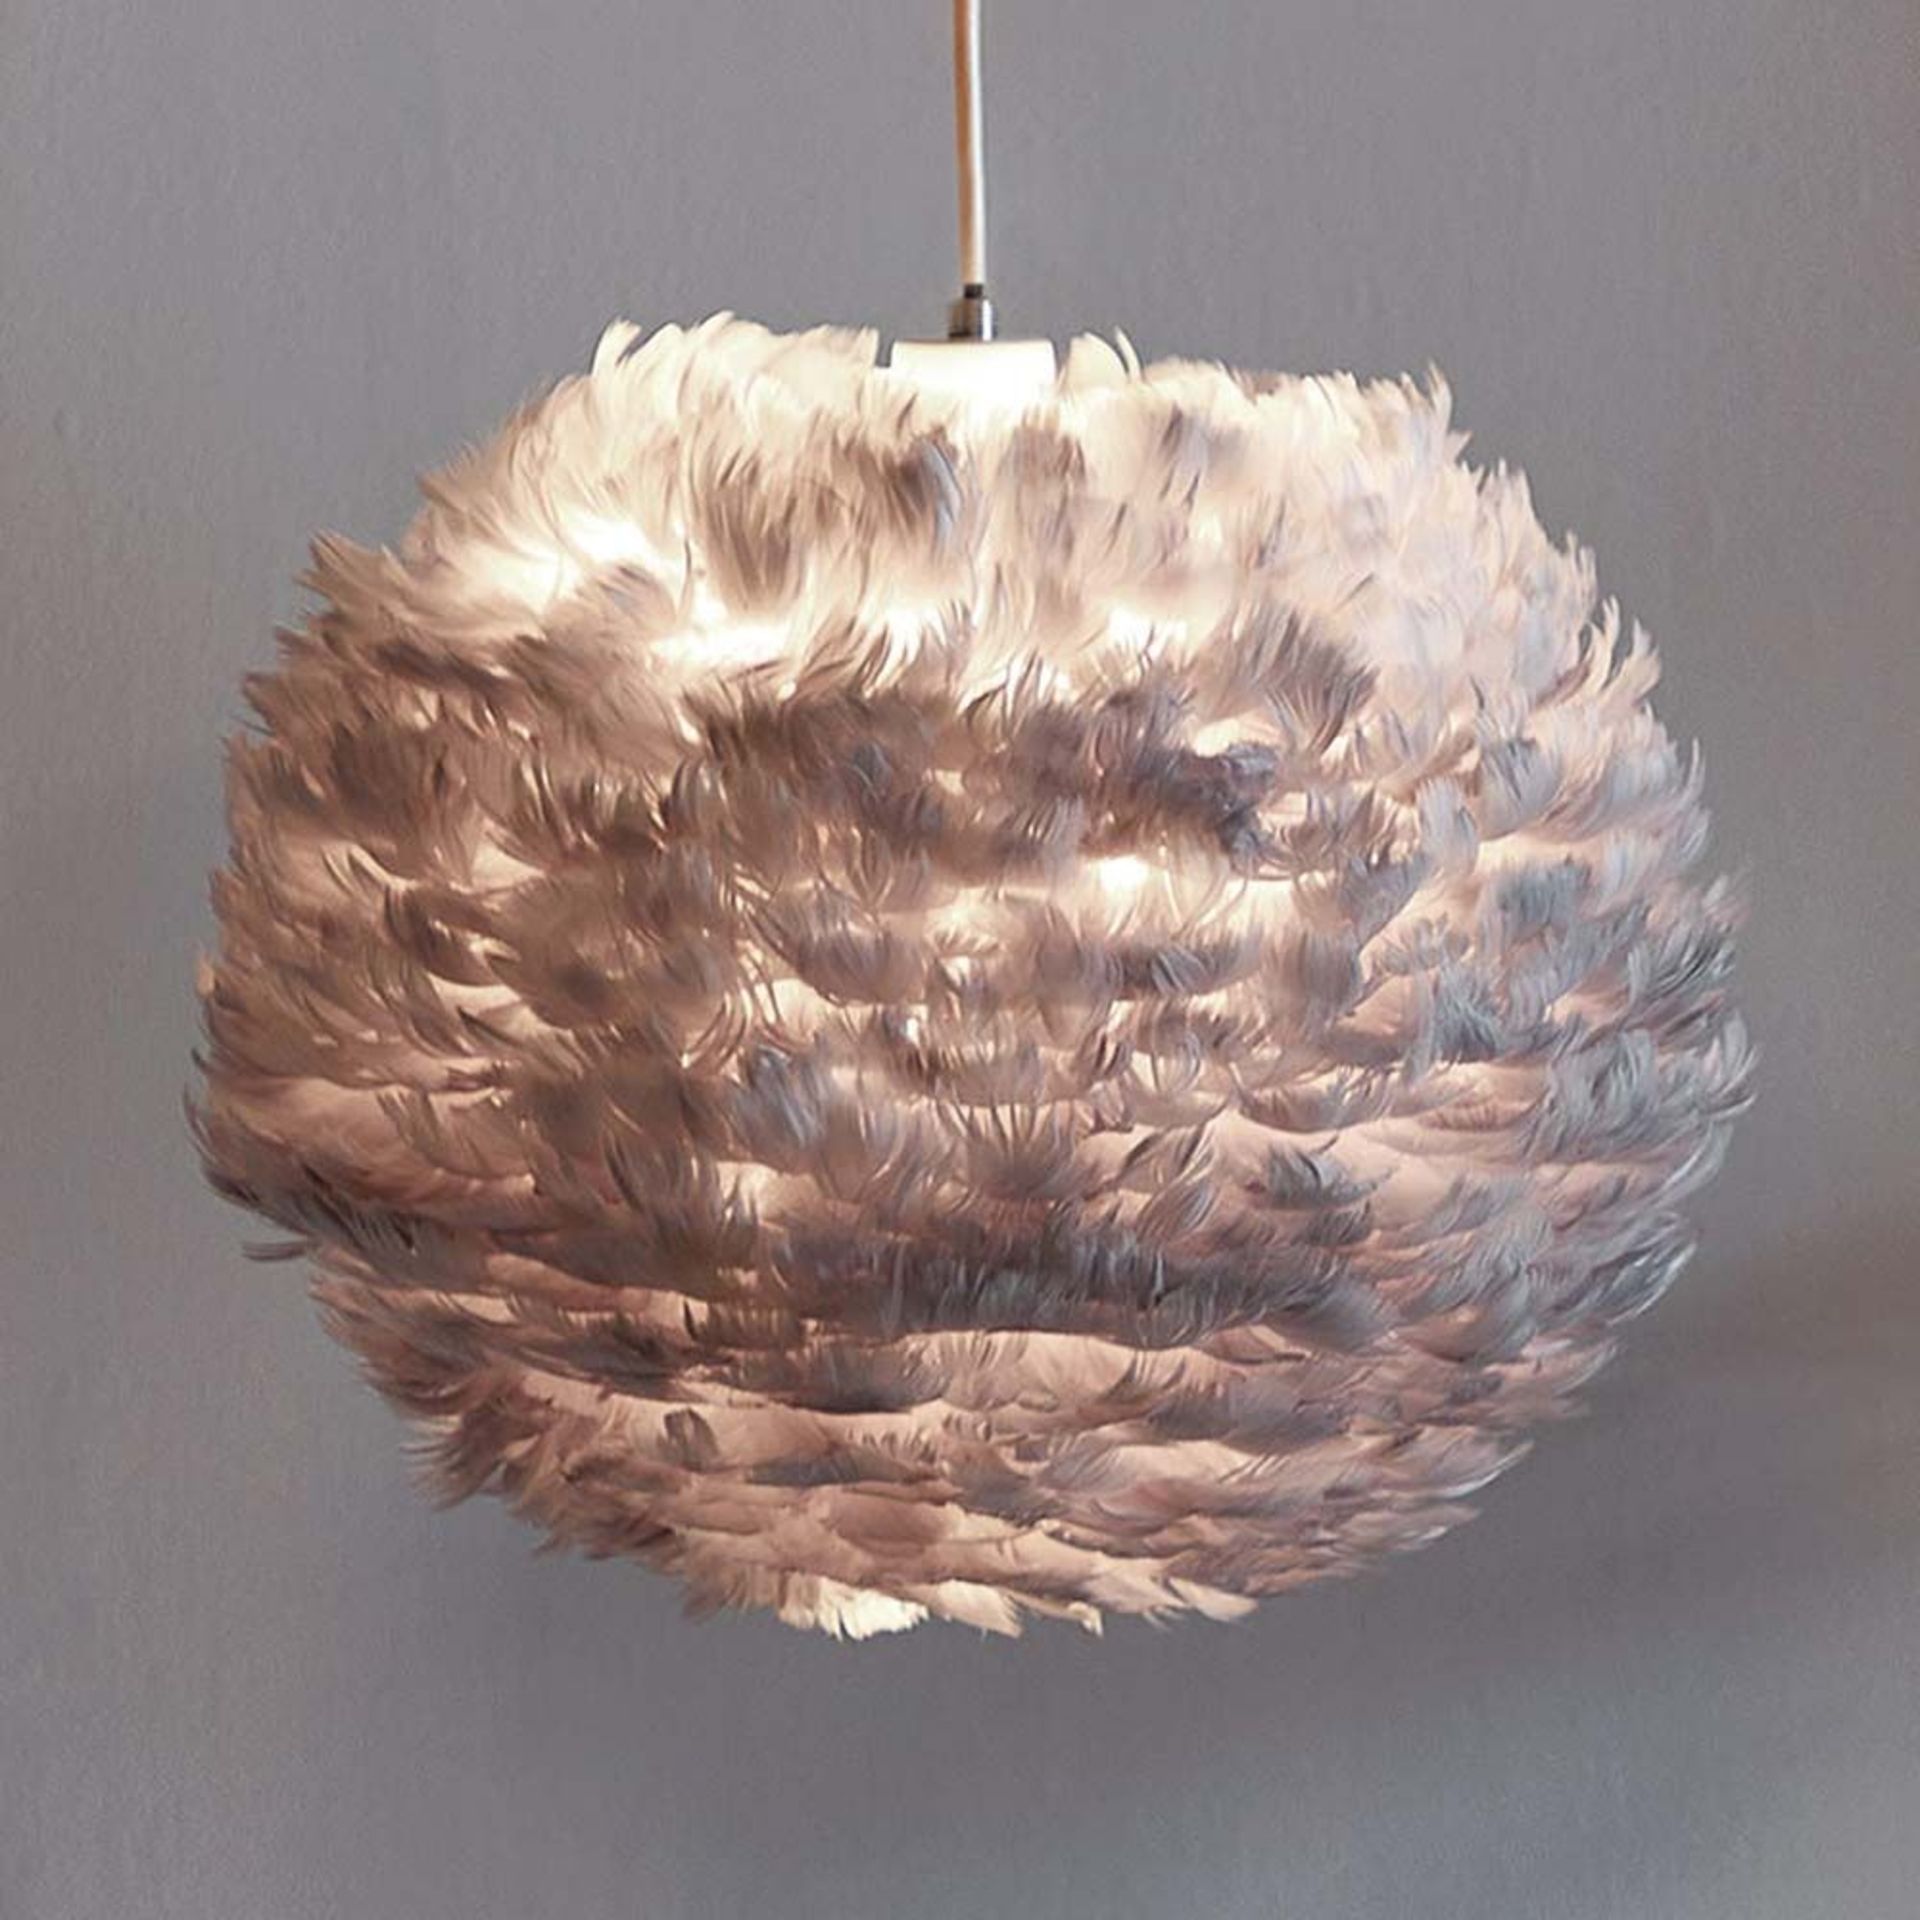 Grey Feather Ceiling Lamp Shade. This ceiling shade is a sure-fire way to make an impact. It’ll look - Image 2 of 2